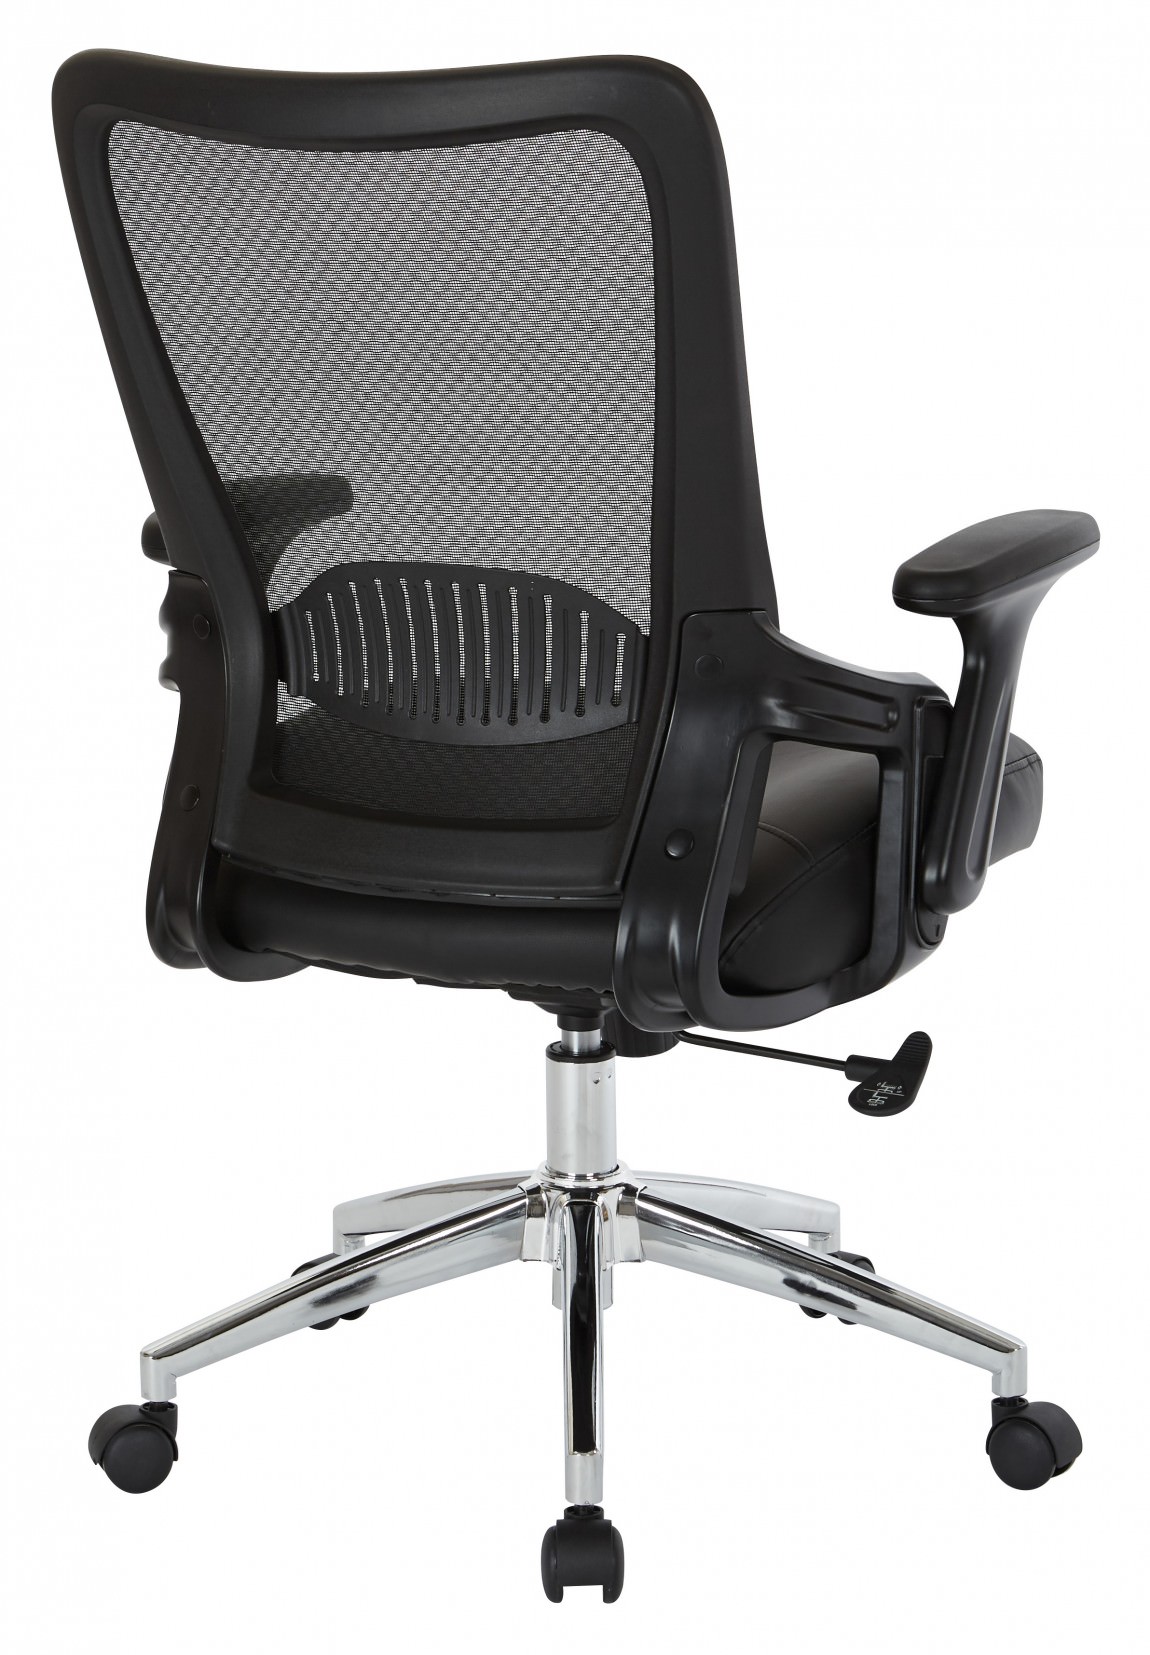 Mid Back Task Chair